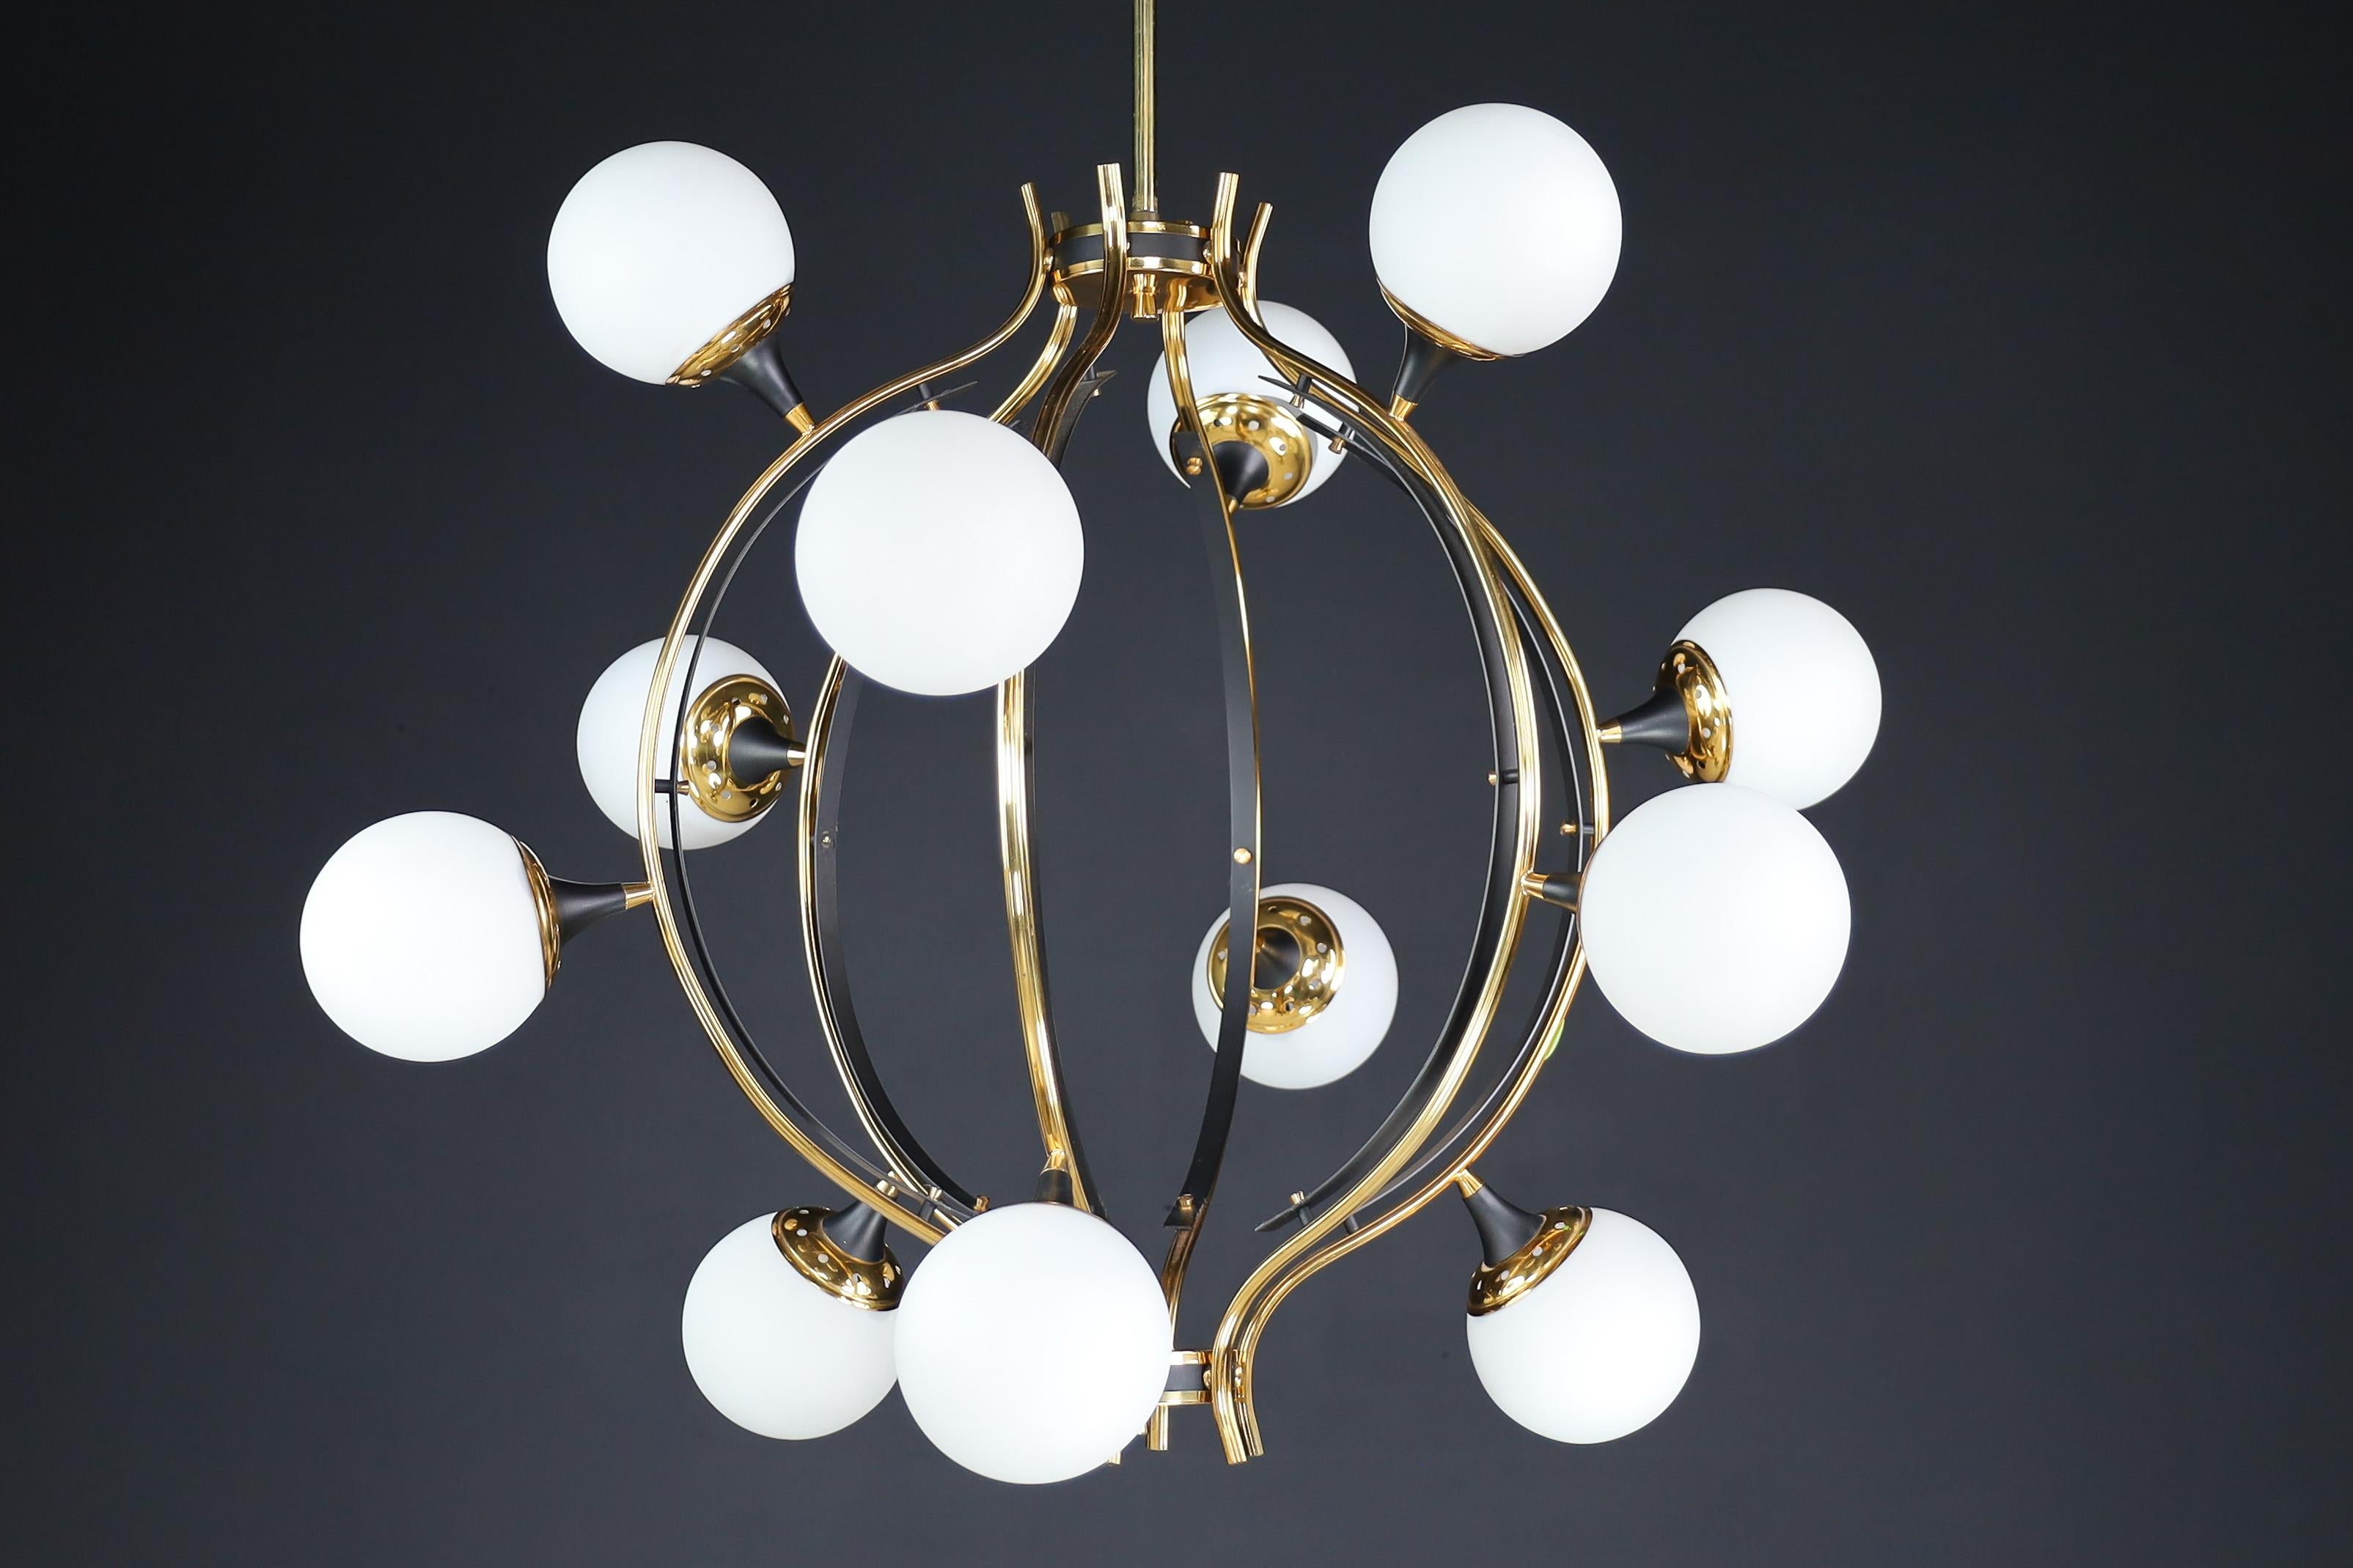 Midcentury Stilnovo Chandelier in Brass and 12 Opaline Globes, Italy 1950s For Sale 3